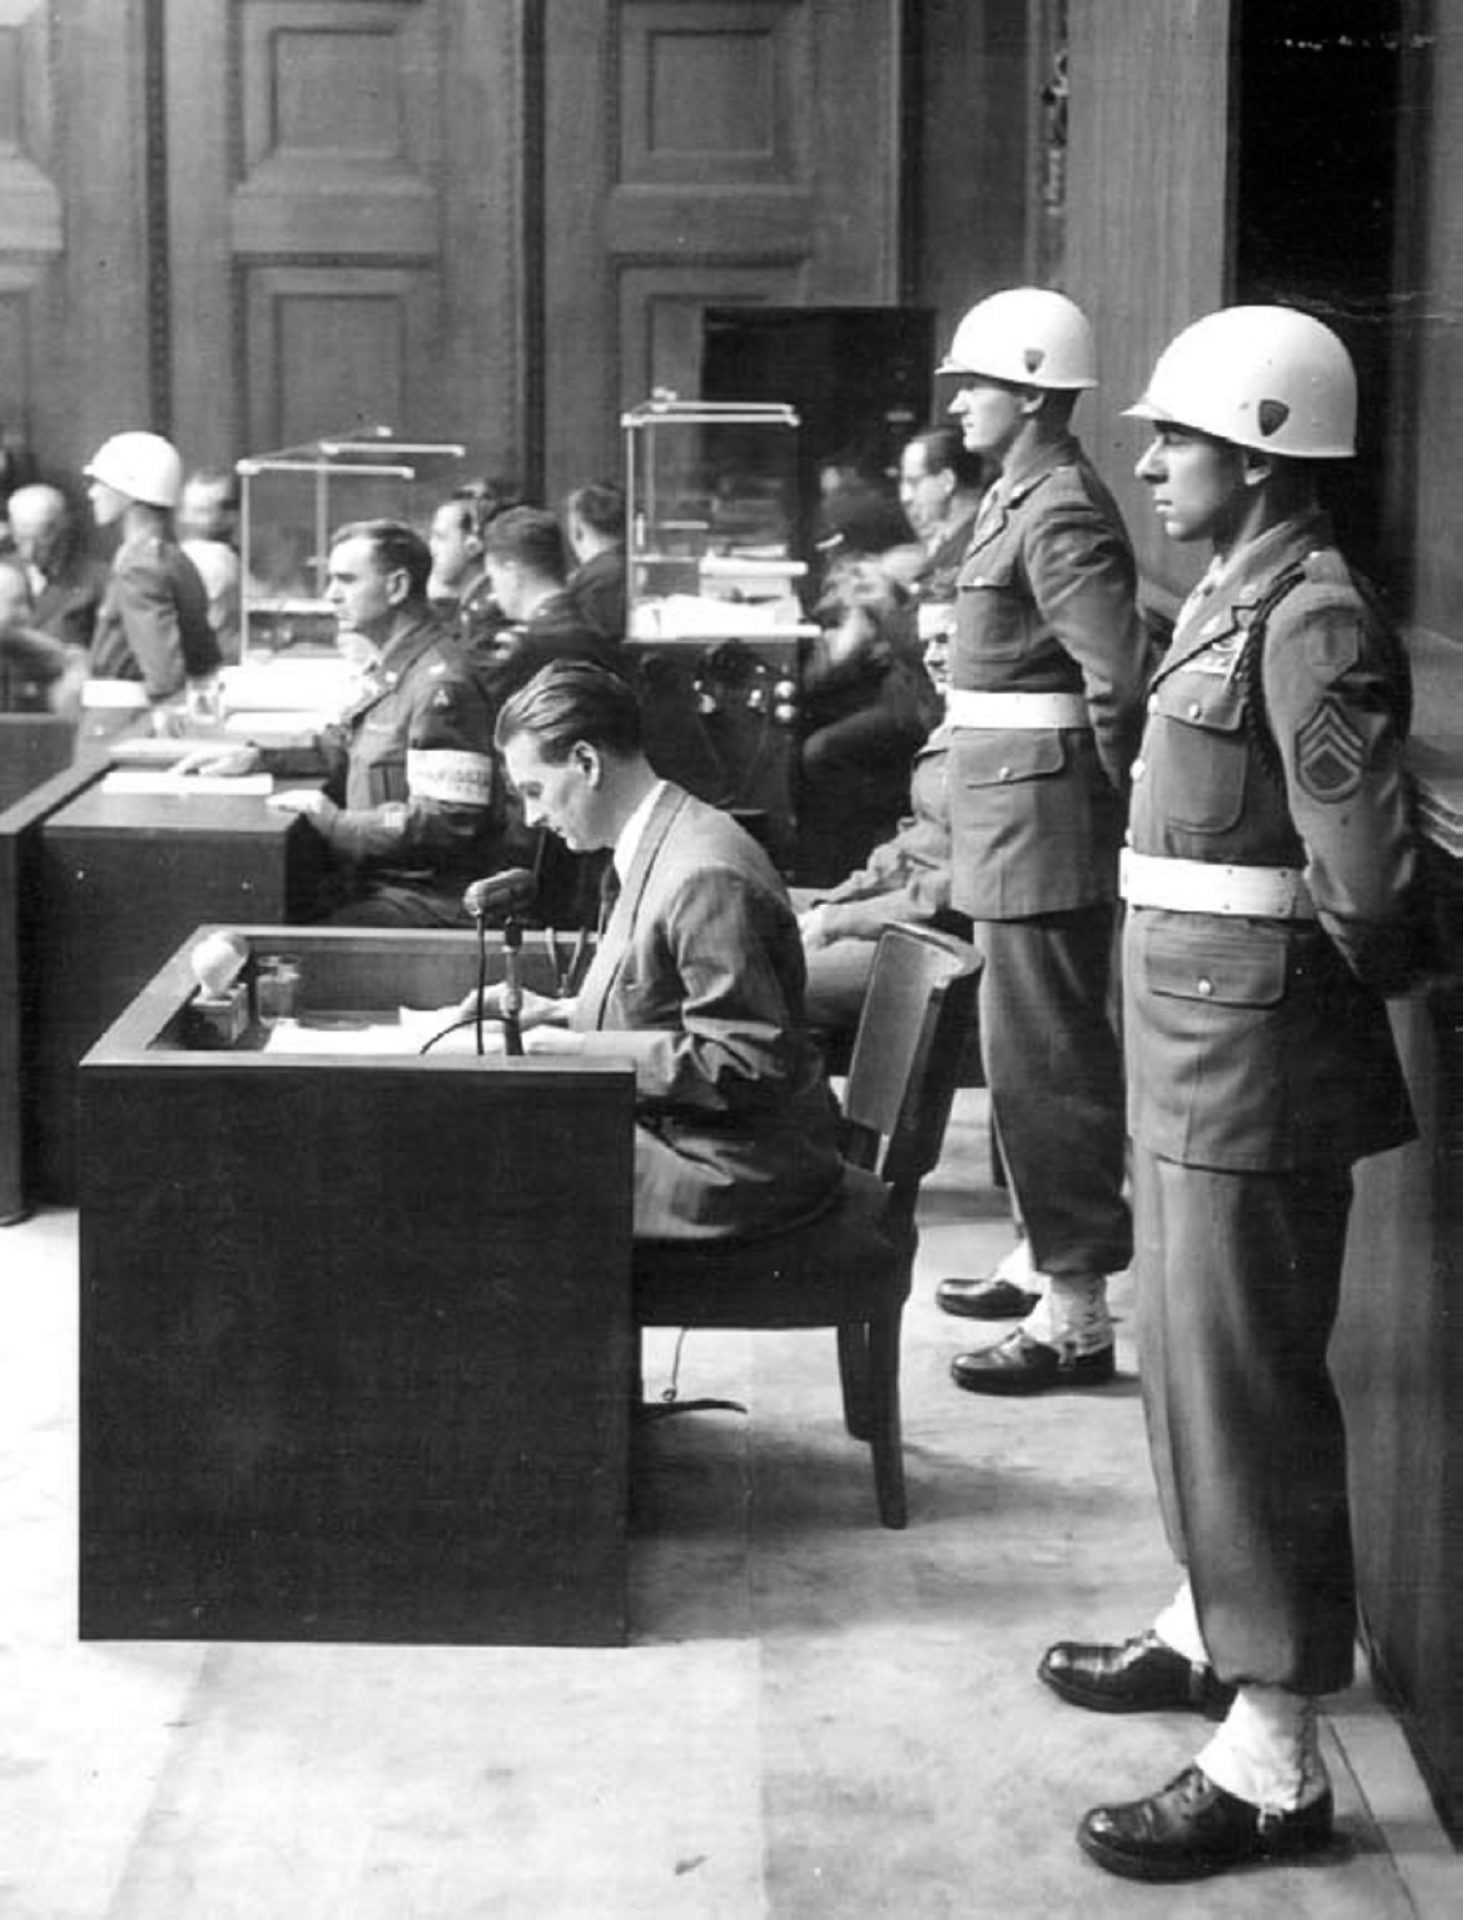 Staff Sgt. Emilio DiPalma (right) stands on guard at the Nuremberg Trials in 1945.